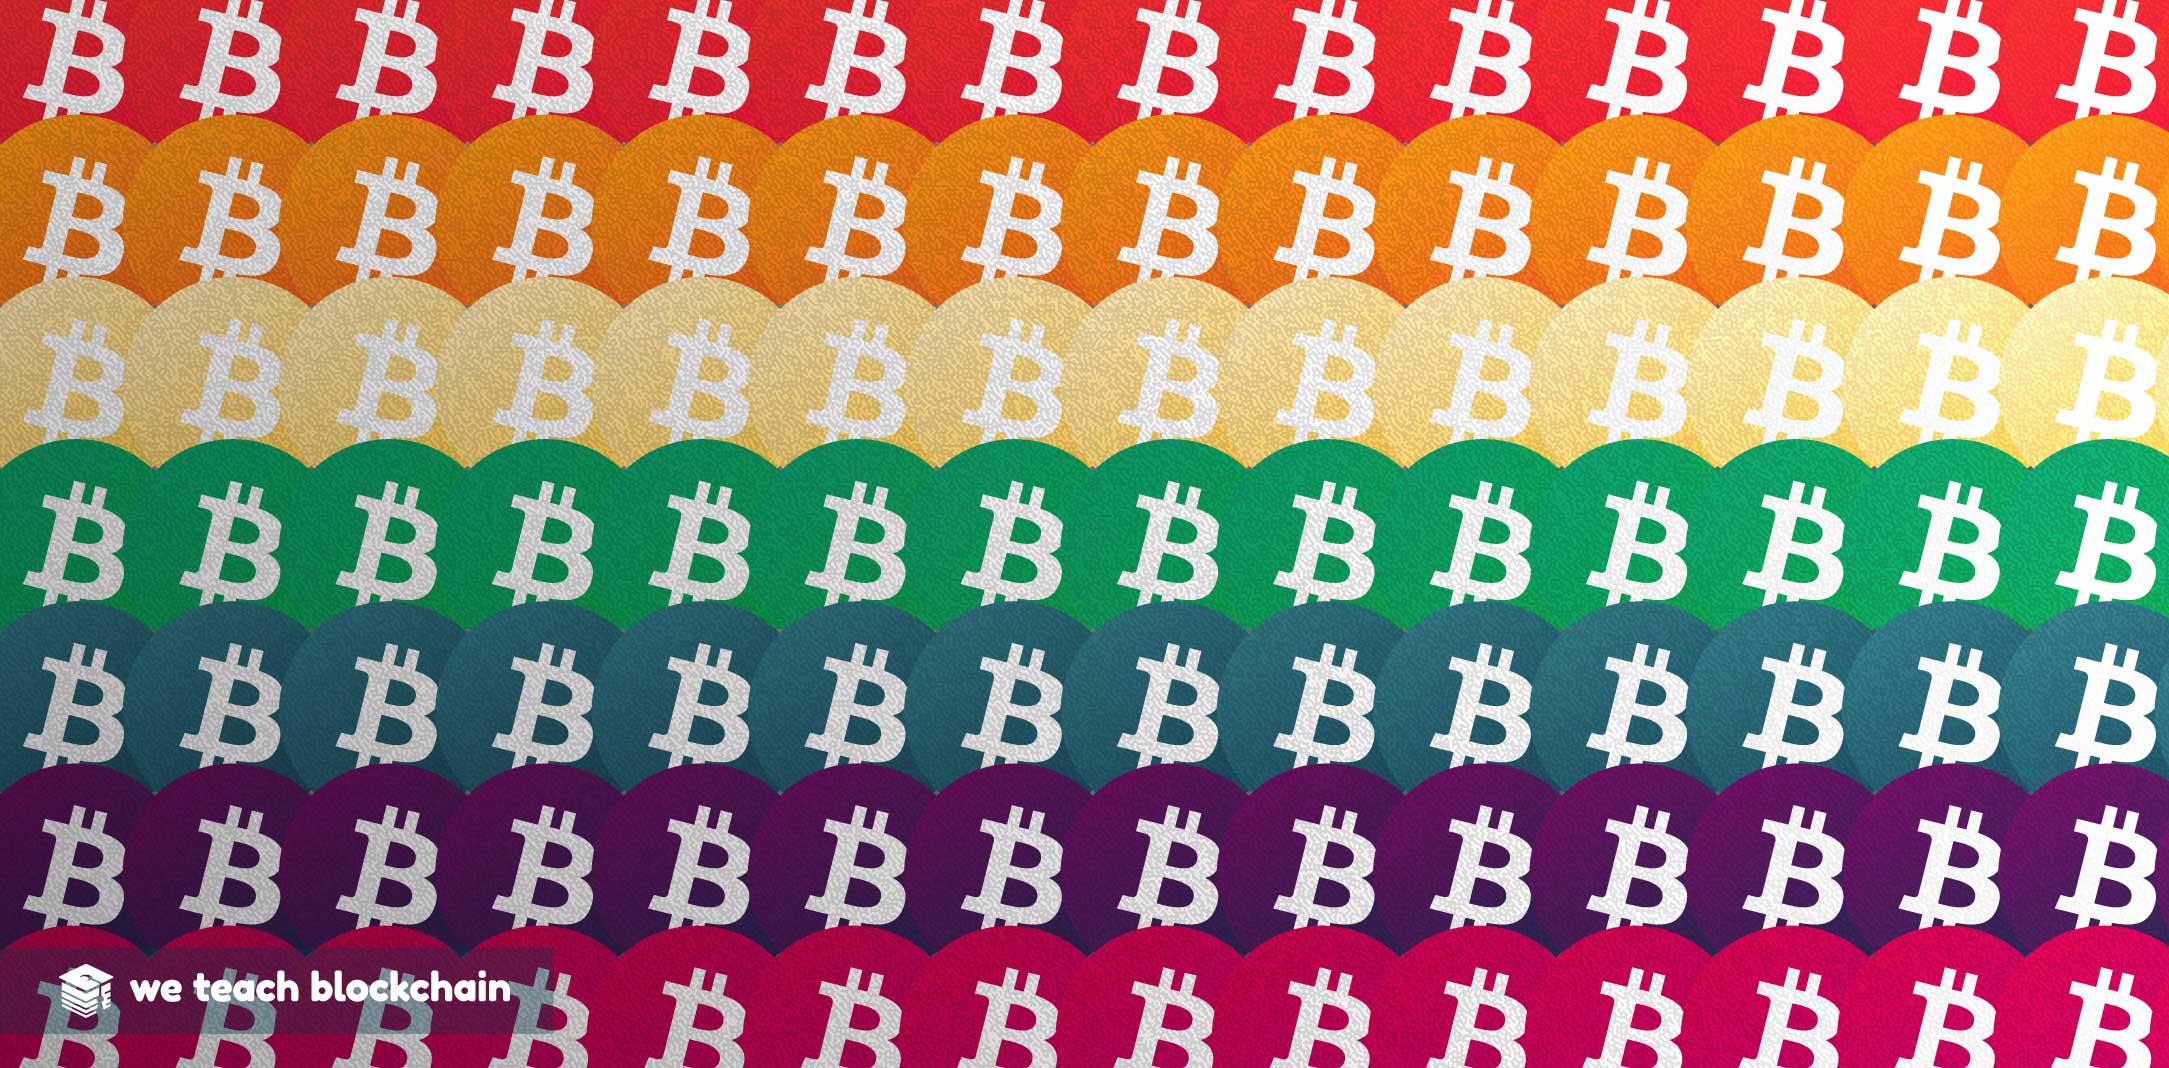 A rainbow of colored bitcoins